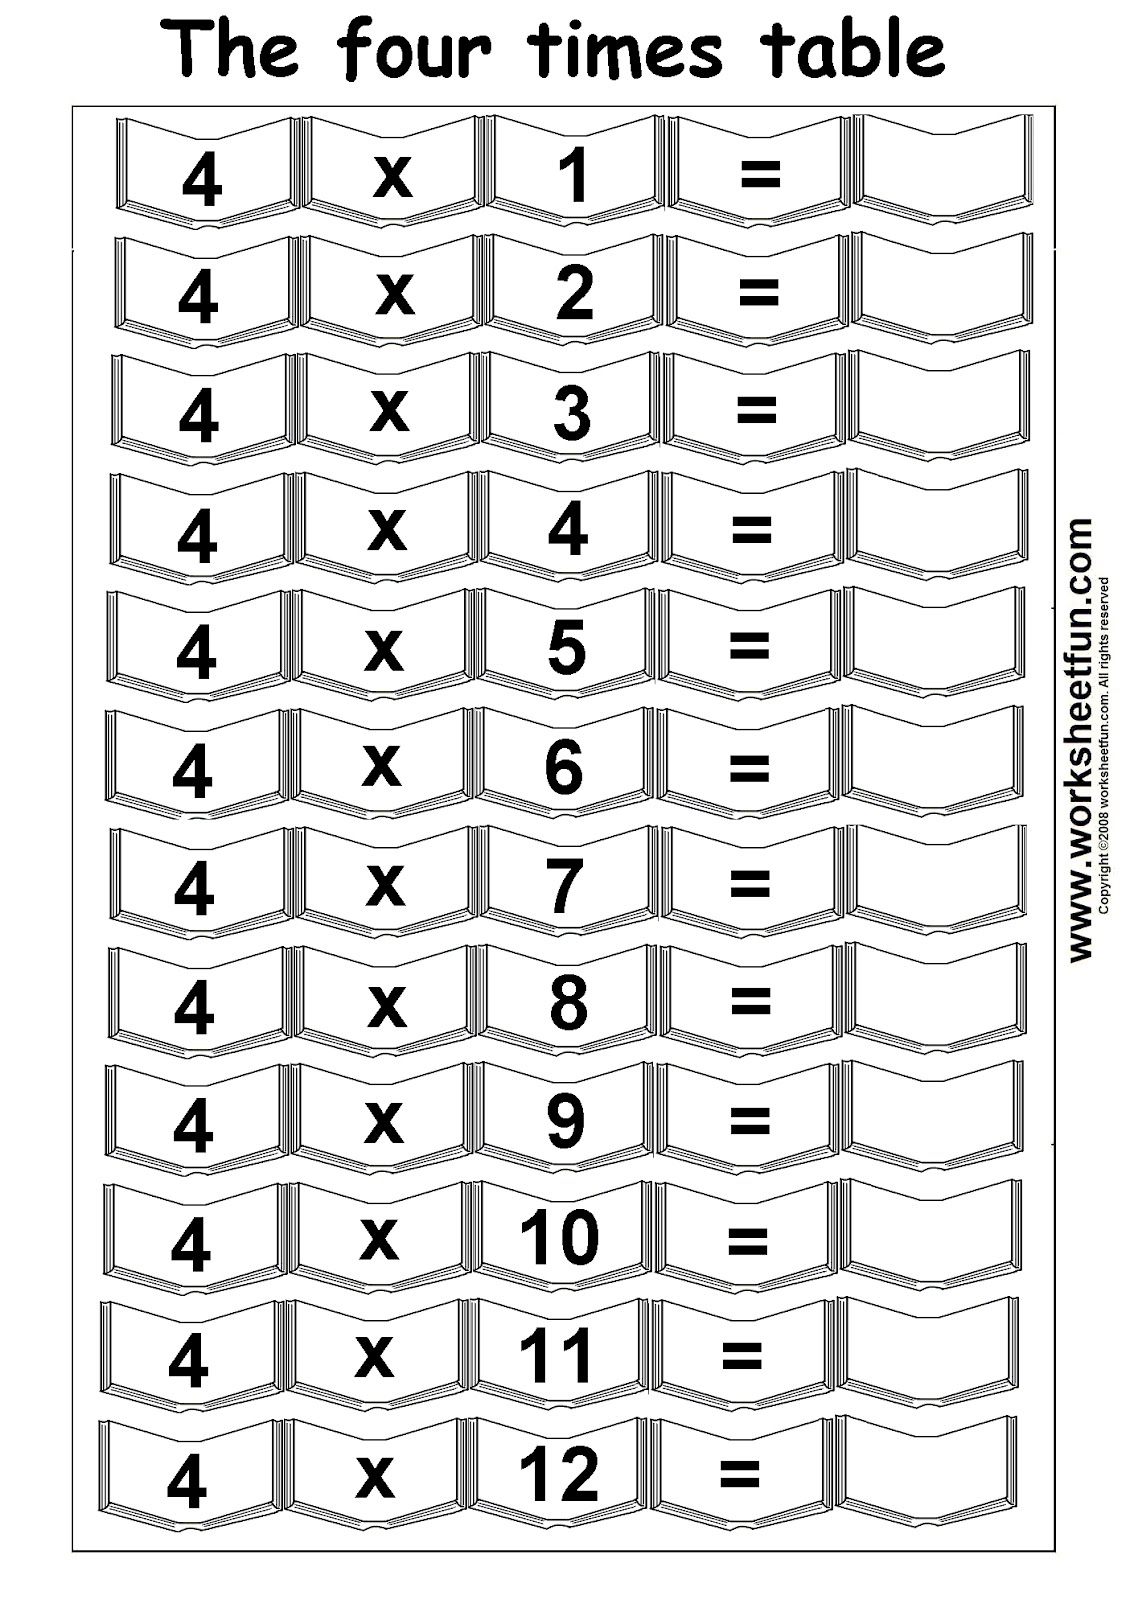 4-times-table-printable-worksheets-times-table-4-free-printable-worksheets-worksheetfuntimes